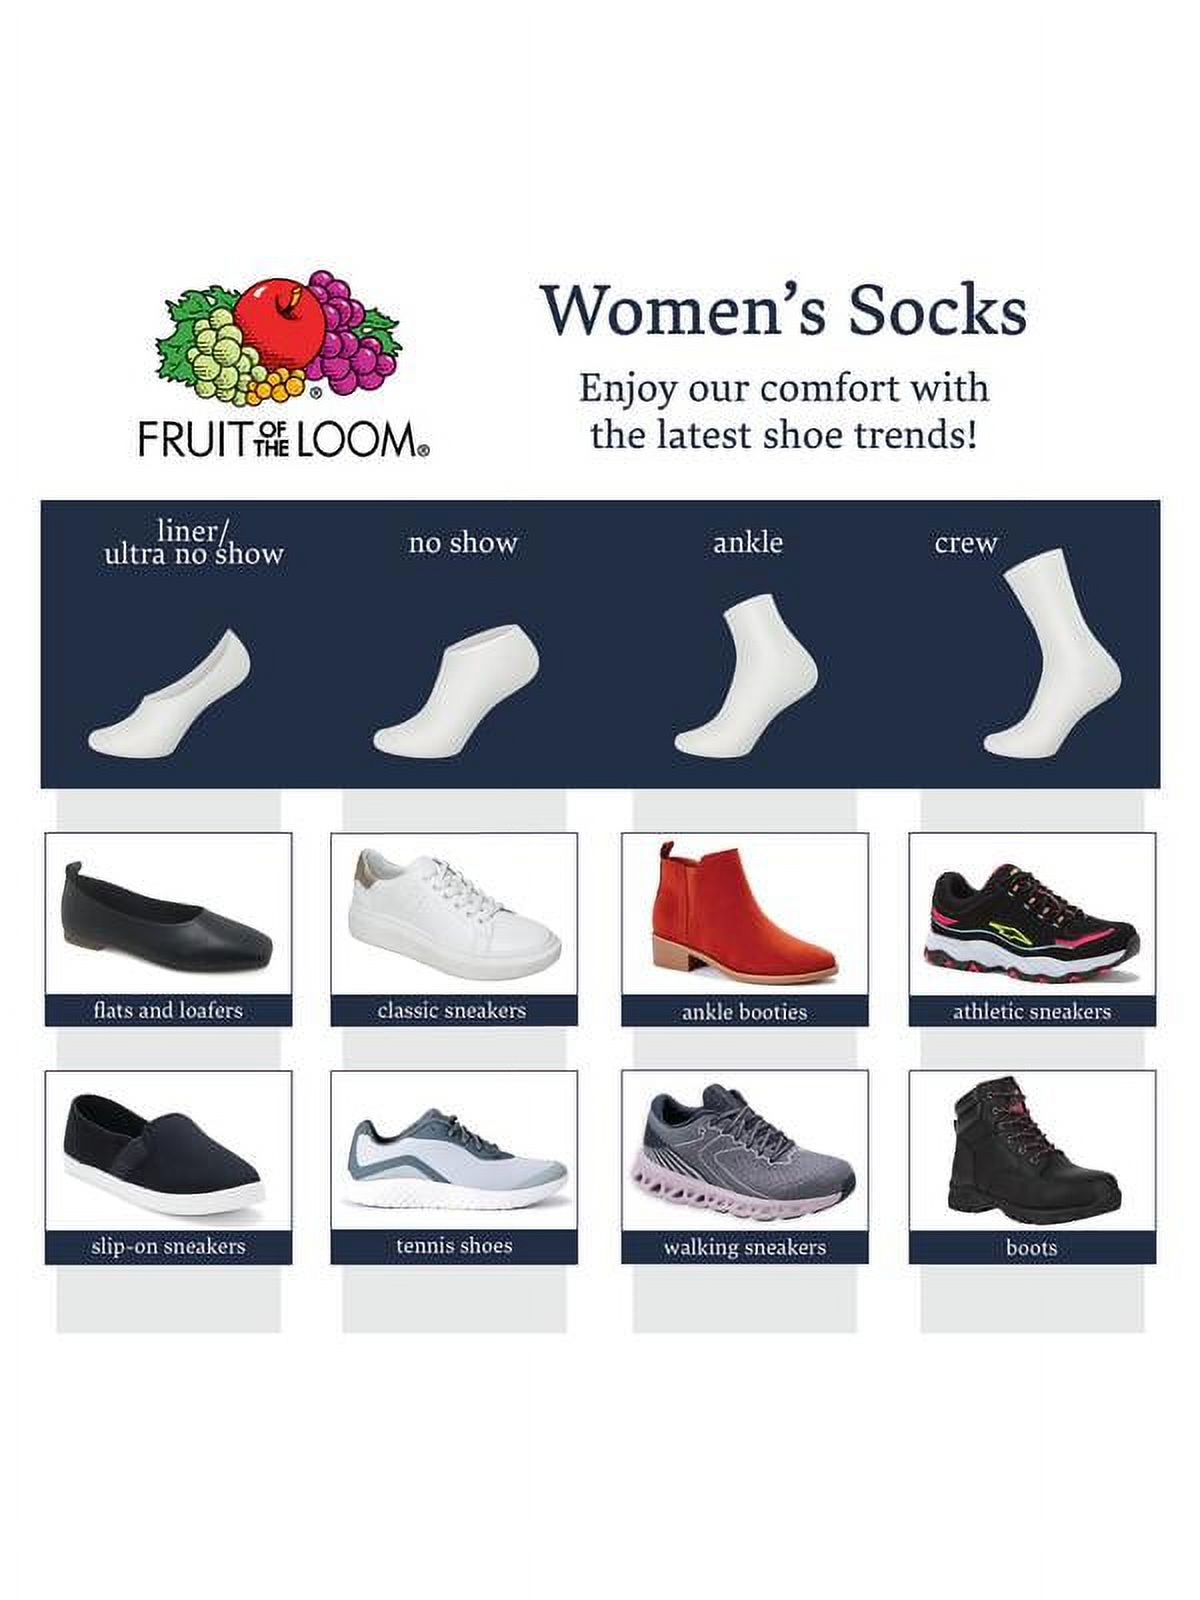 Fruit of the Loom Women's CoolZone Cotton Lightweight No Show Socks, 6 Pack - image 5 of 6